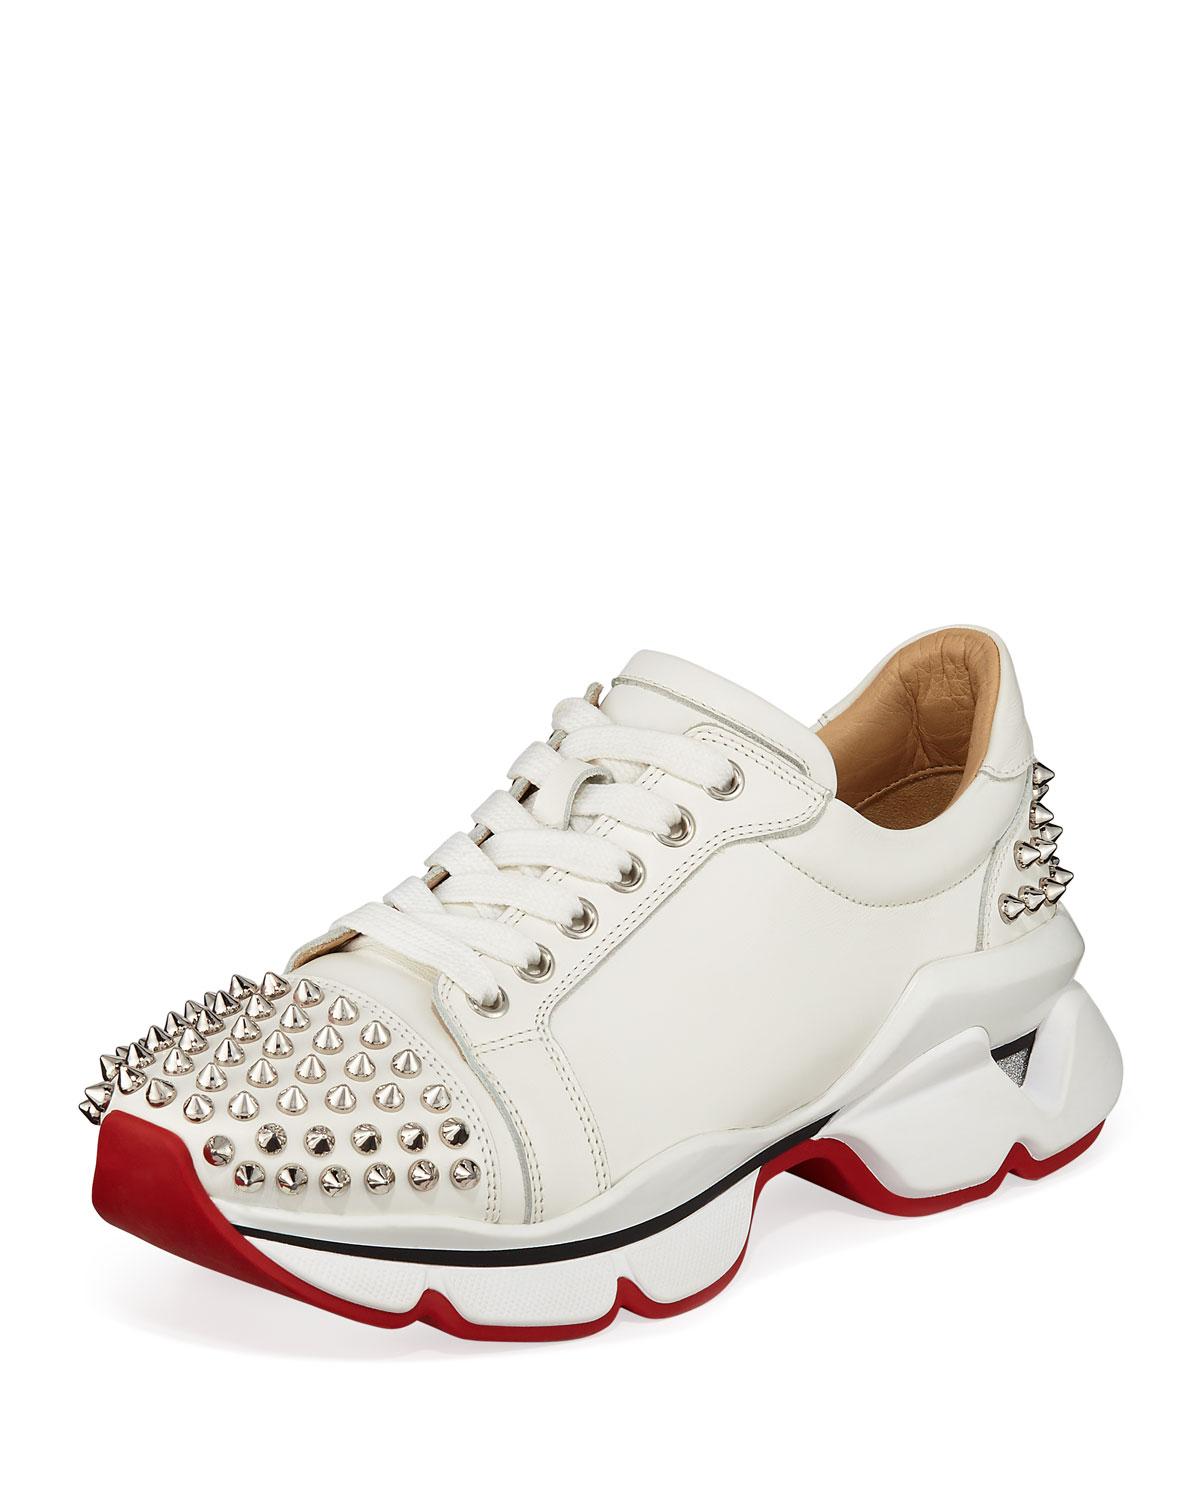 Christian Louboutin Vrs Leather Red Sole Sneakers in White/Silver (White) - Lyst